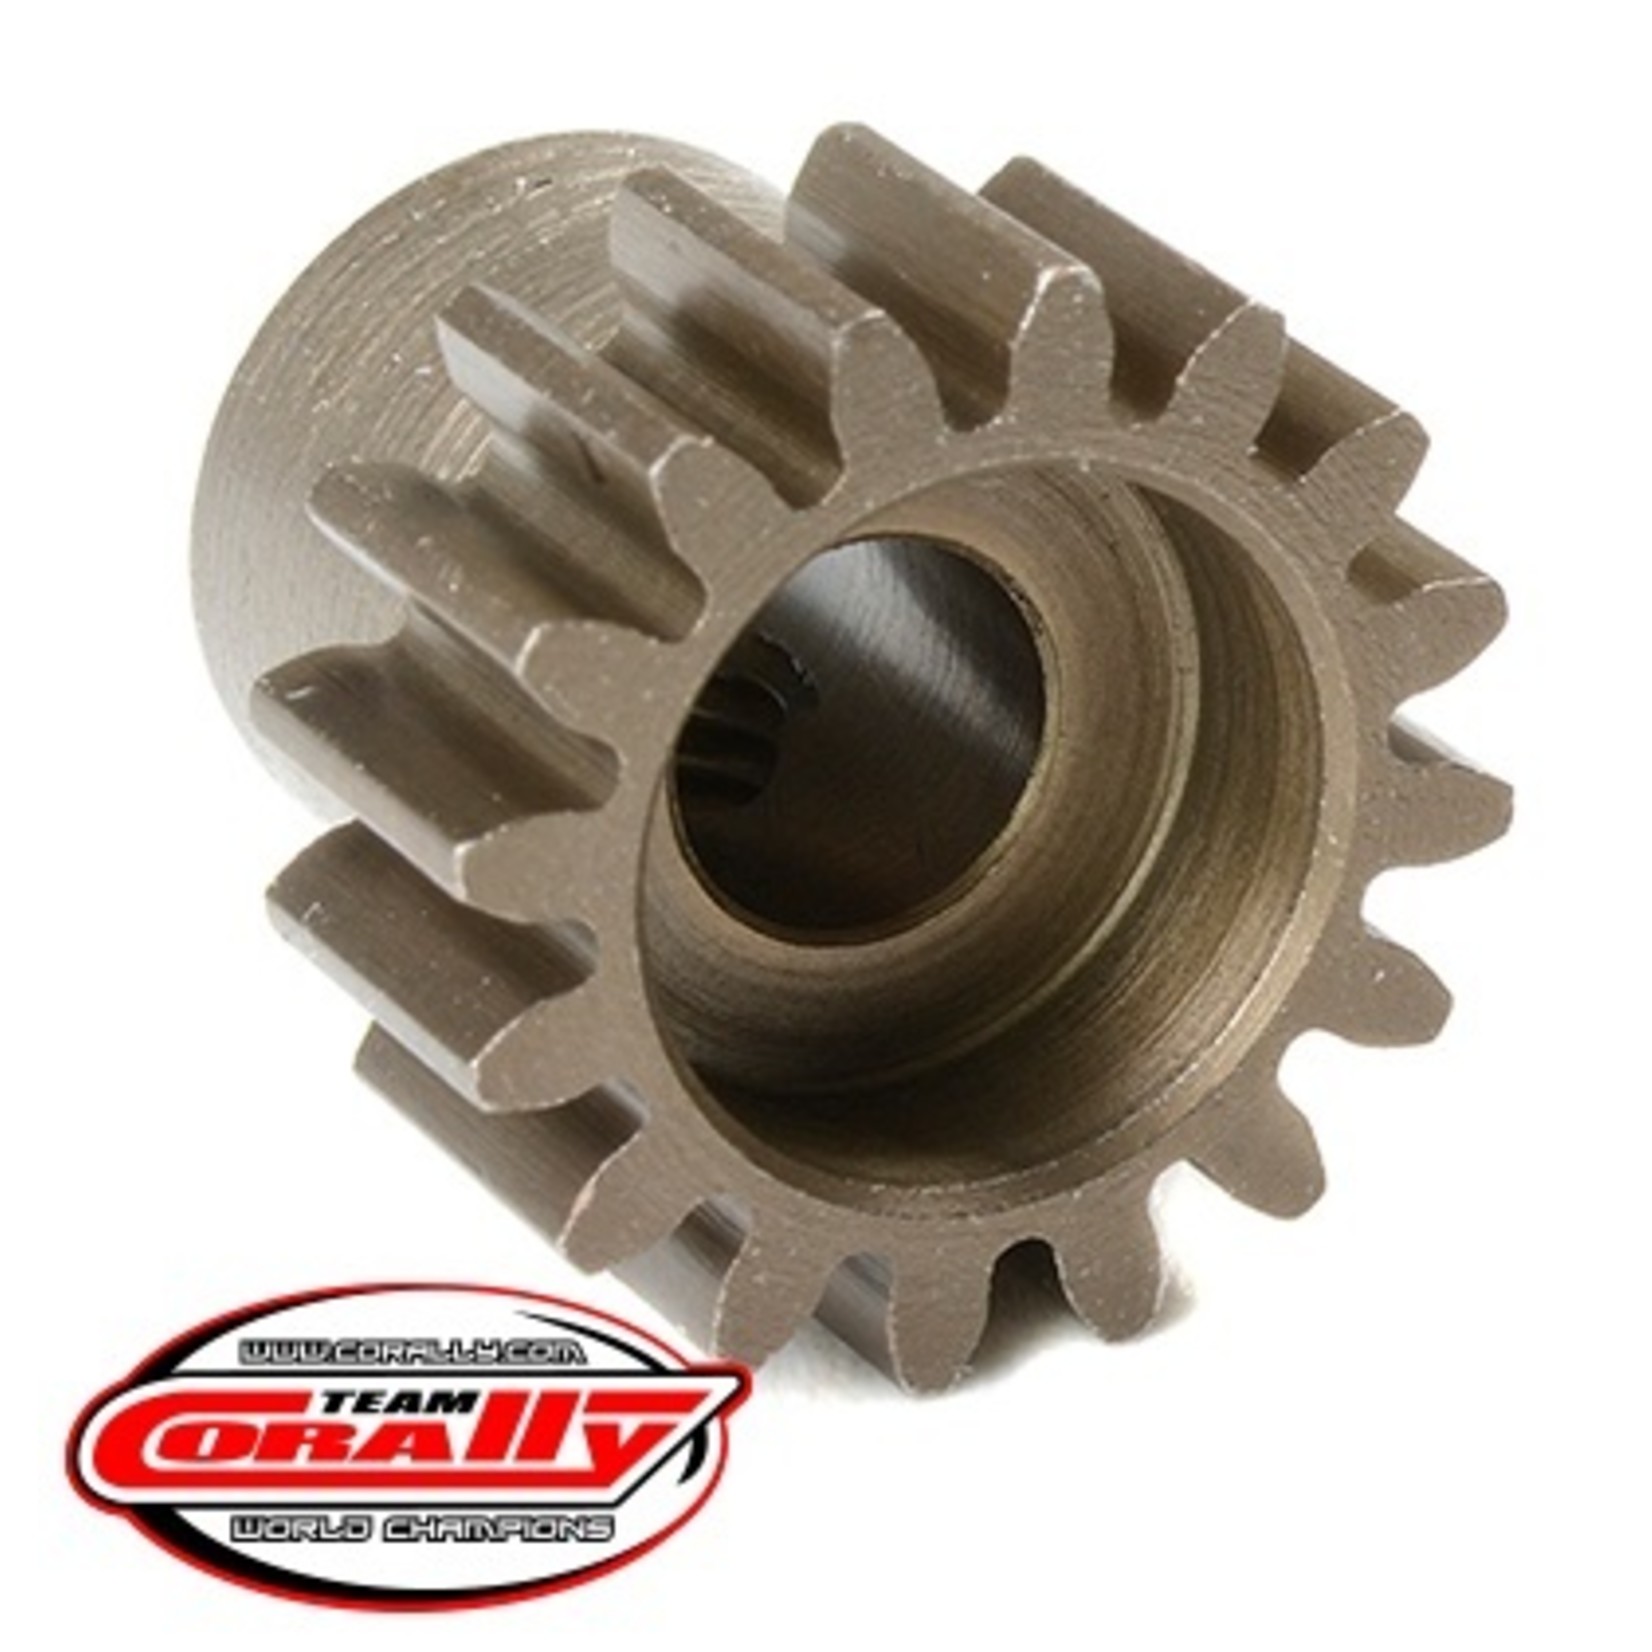 Corally (Team Corally) 32 Pitch Pinion - Short - Hardened Steel - 16 Tooth -